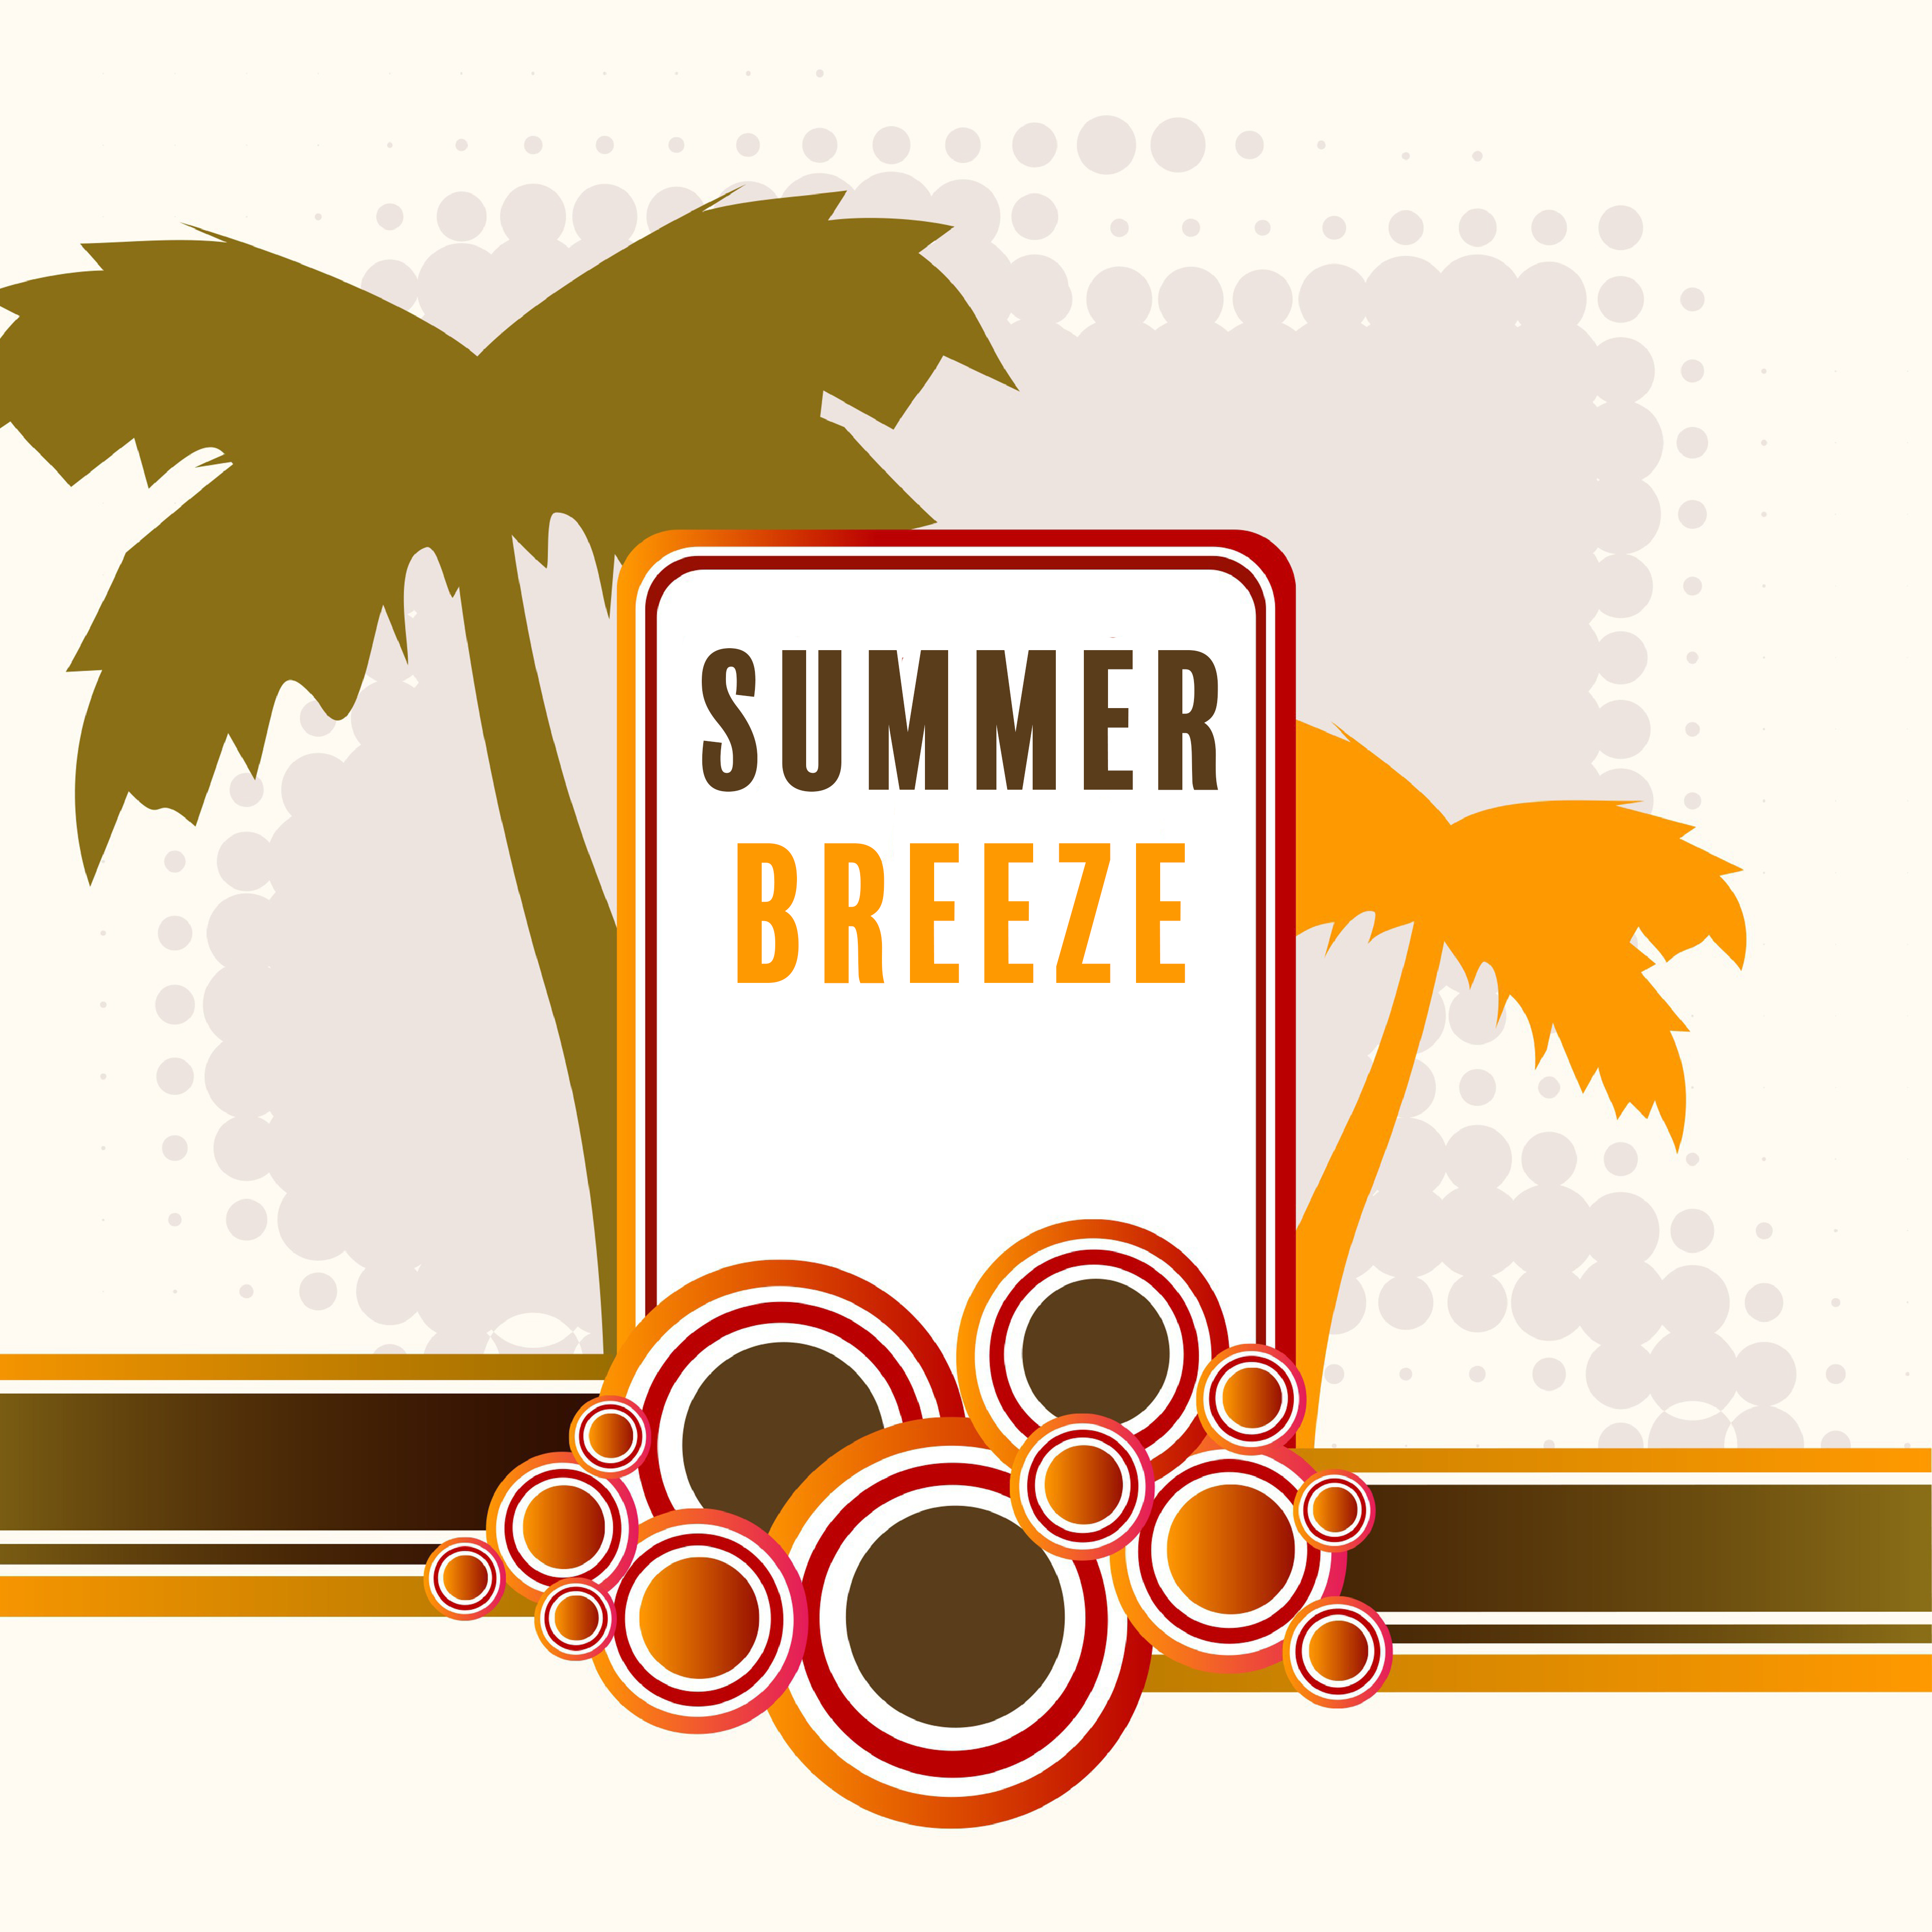 Summer Breeze – Relaxing Chill Out Music, Summer Sounds, Beach Lounge, Holiday Rest, Journey Music